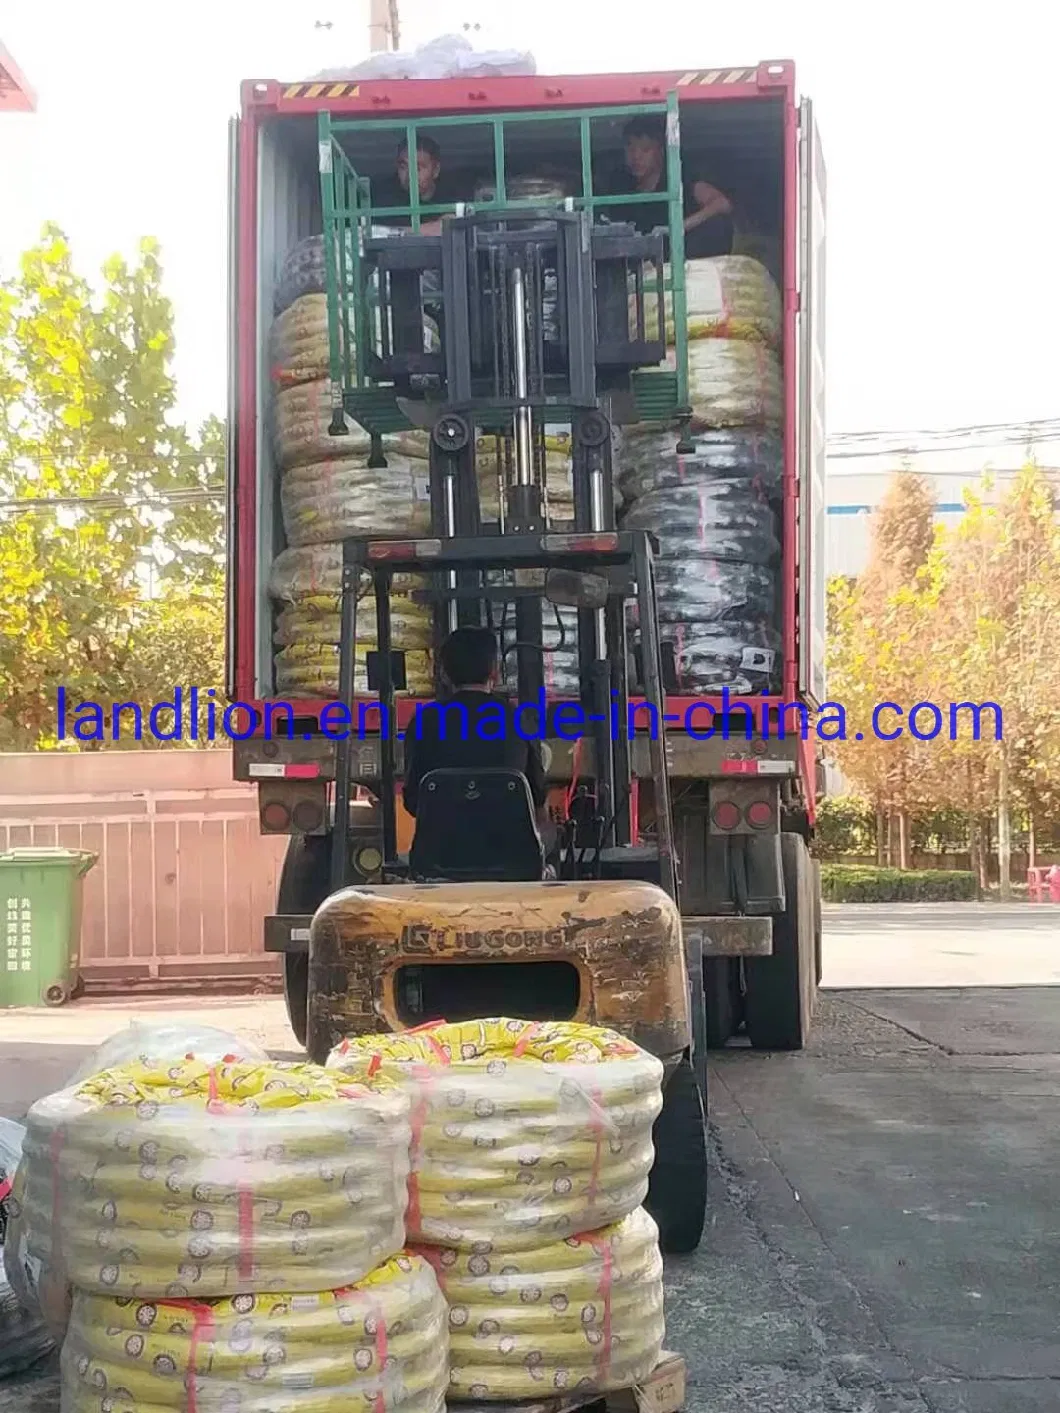 China Factory Directly Supply Gharry Tyre 5.00-15, 130/100-15